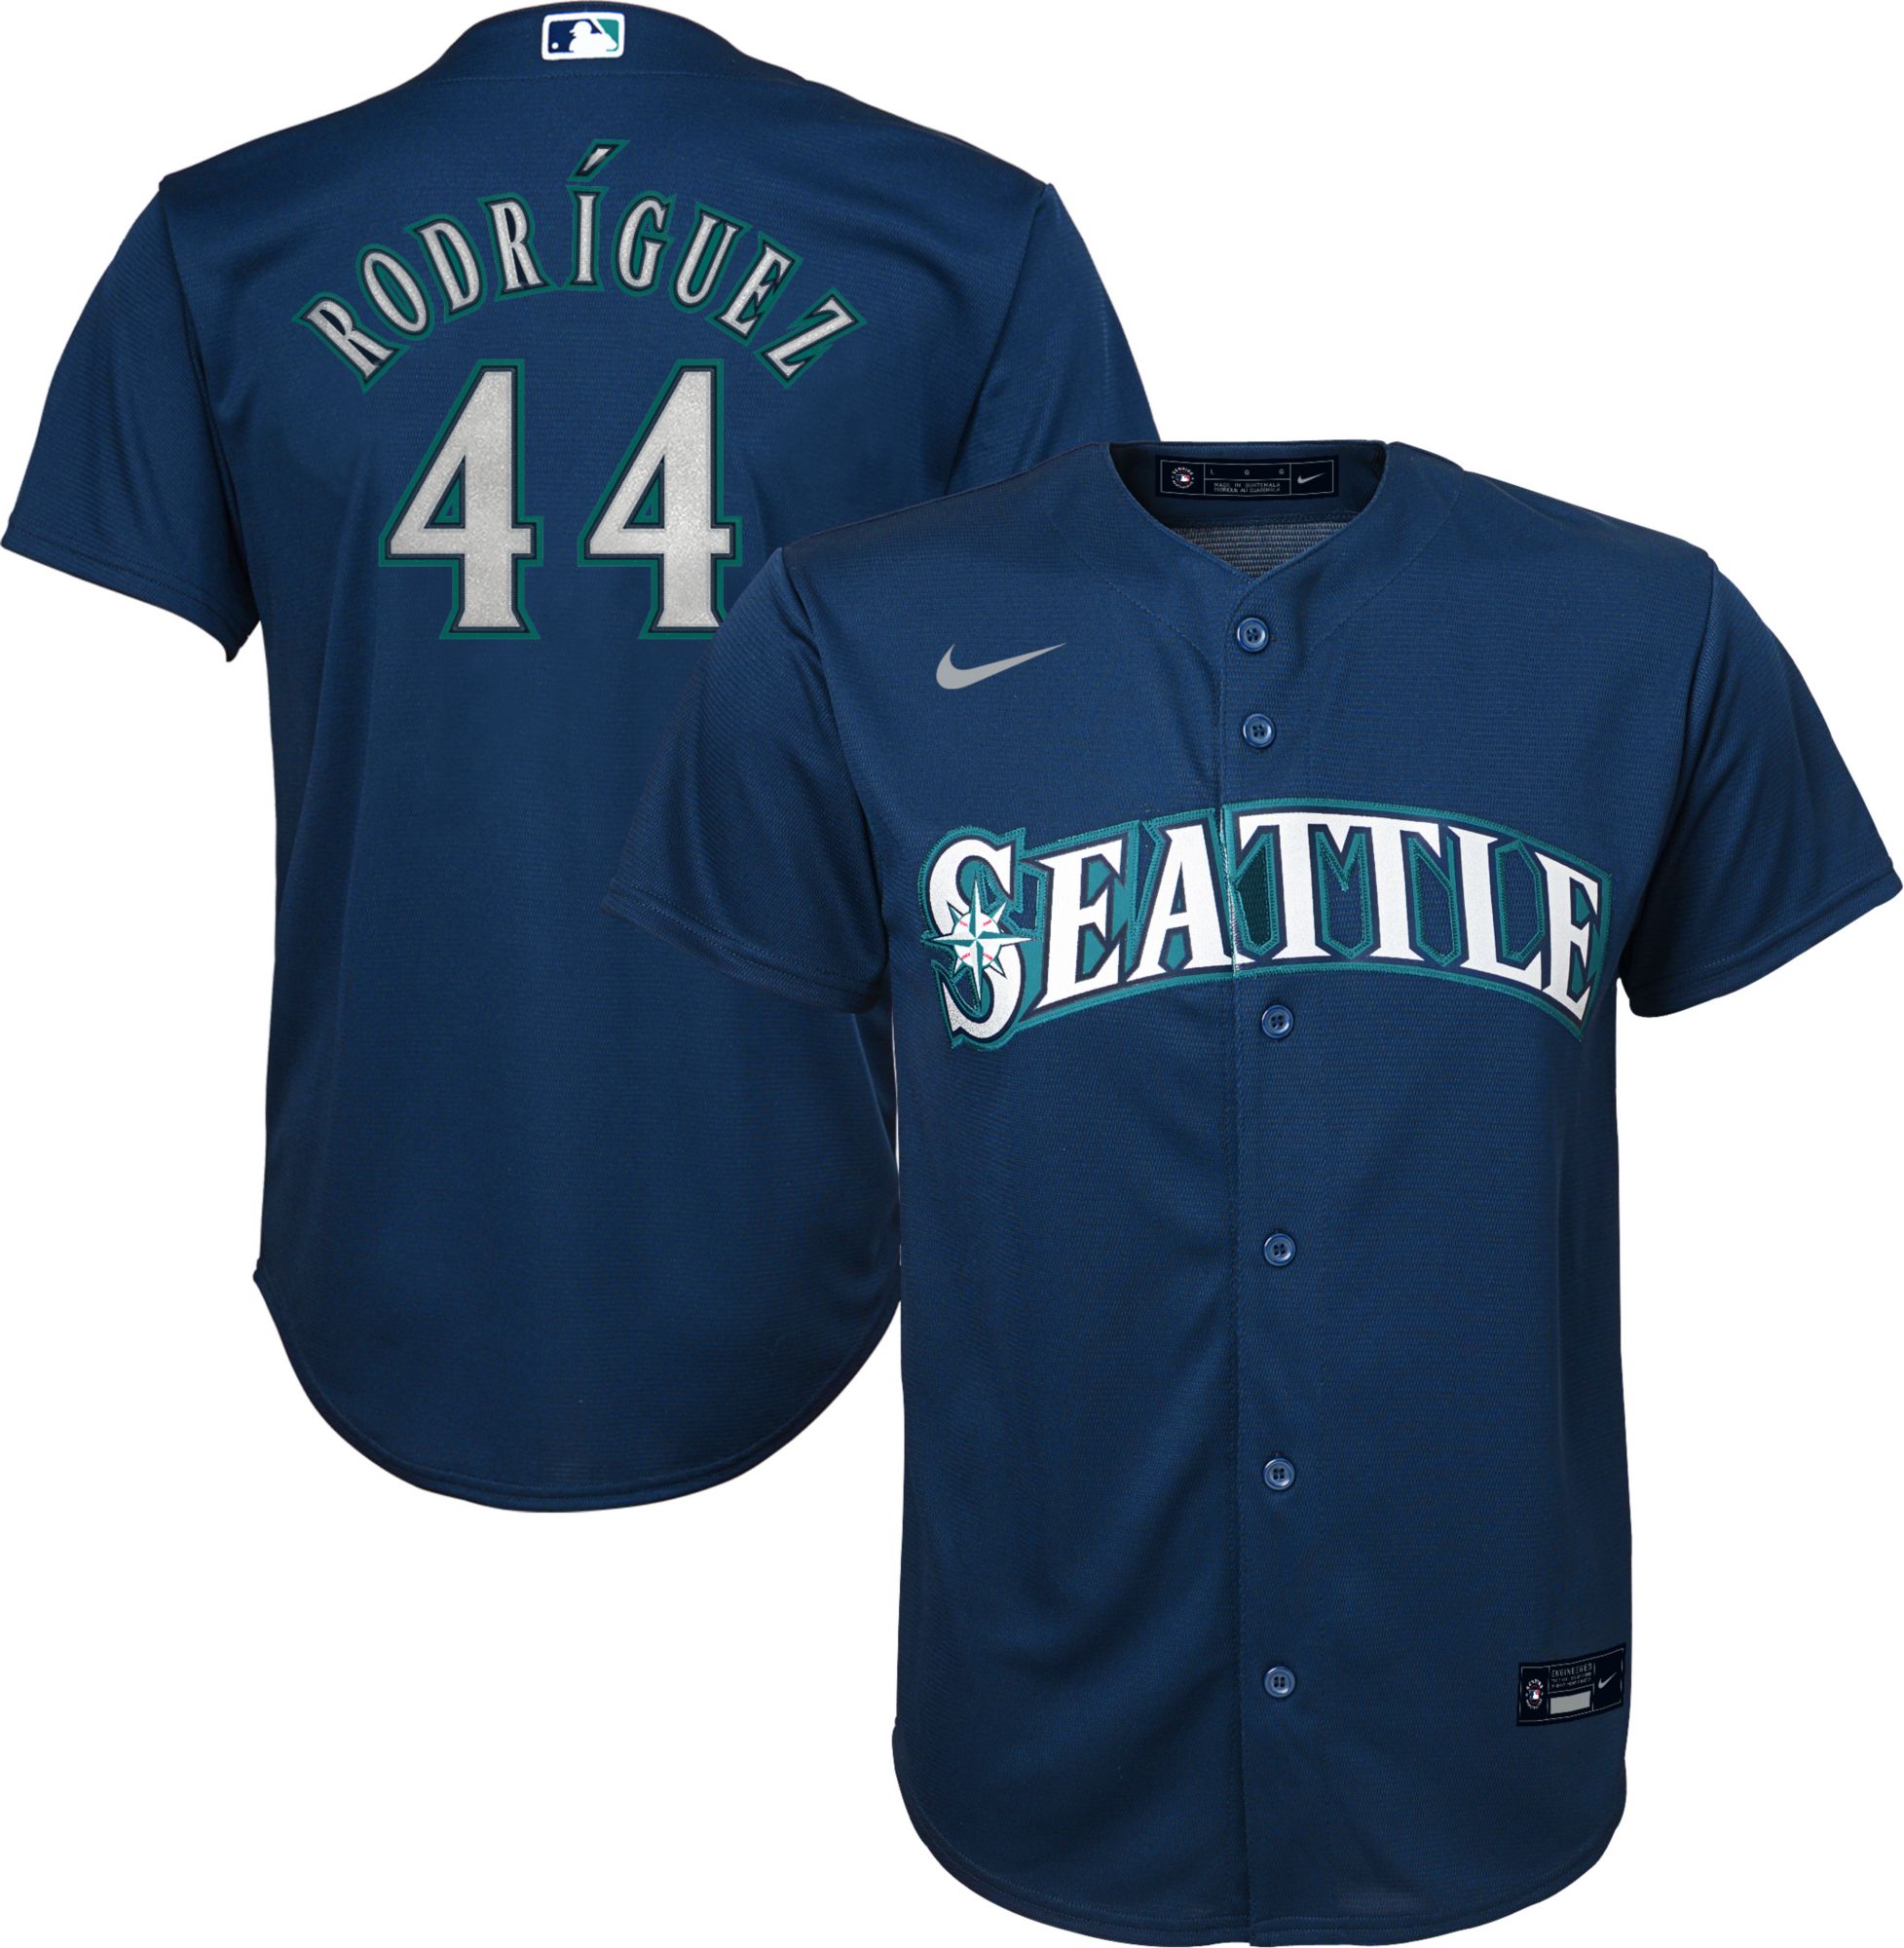 Men's Majestic Ken Griffey Jr. Light Blue Seattle Mariners Cooperstown  Collection Cool Base Player Jersey